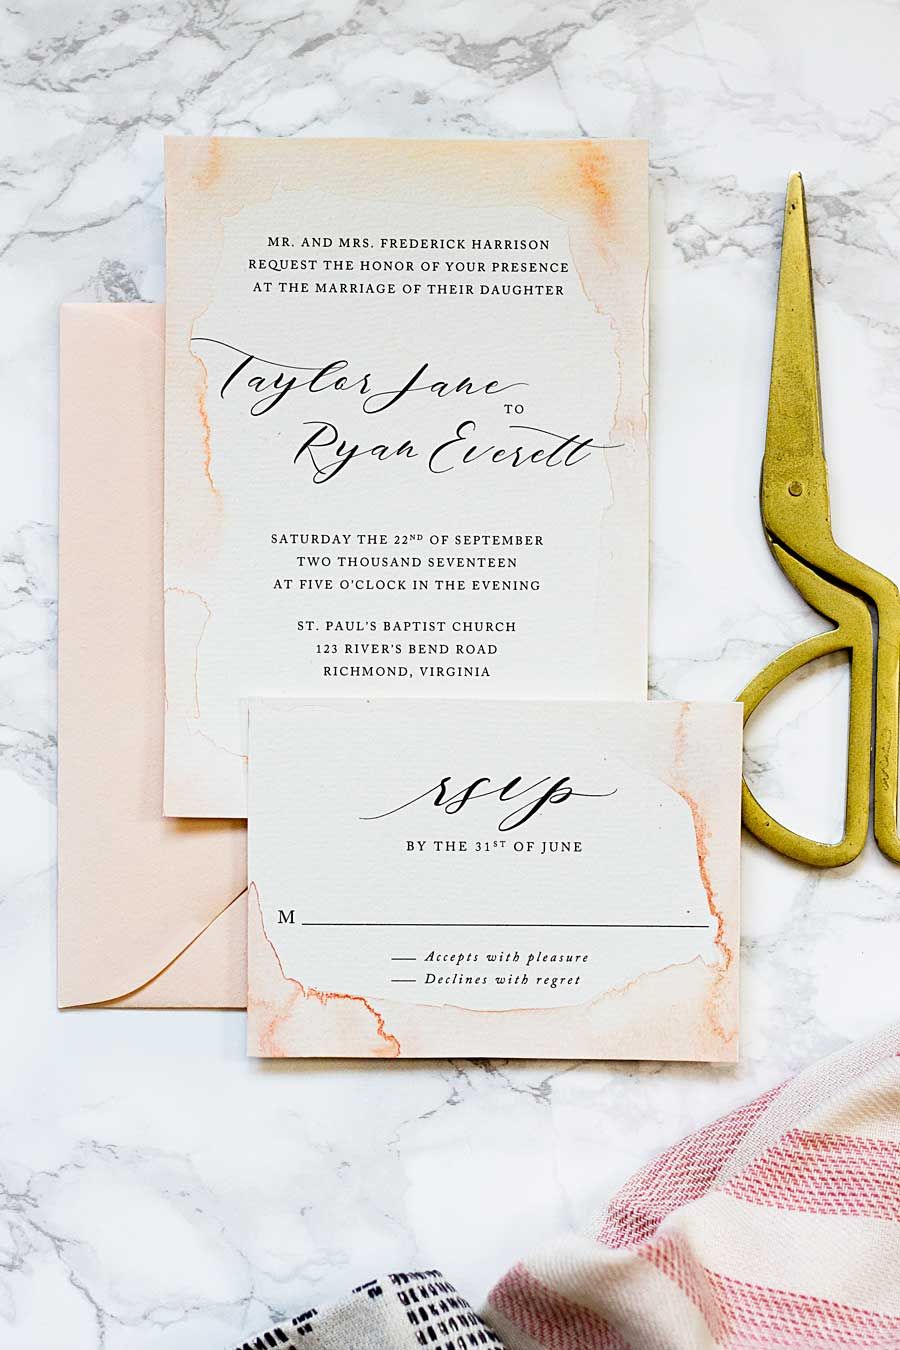 Subtle Watercolor Wedding Invitations How To Make Your Own